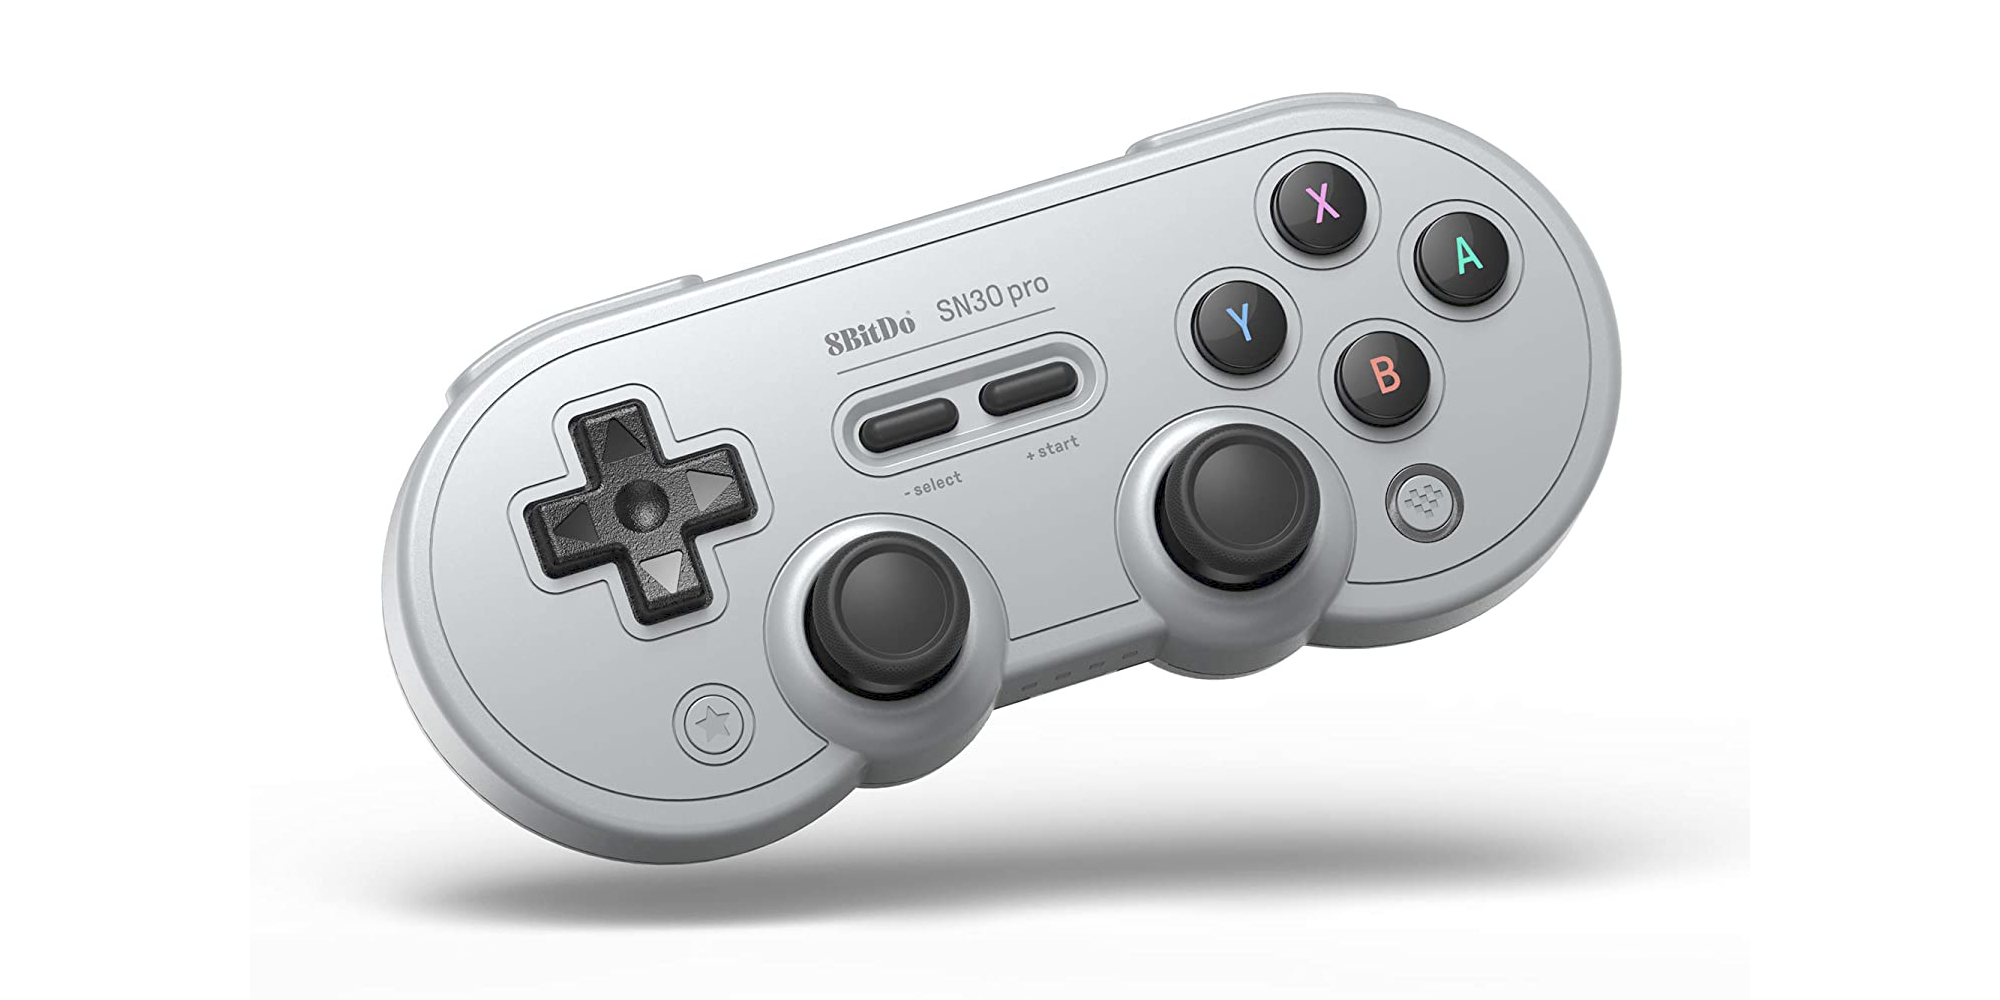 Popular 8bitdo Sn30 Pro Controller Gets All New Gray Edition That Works With Switch Pc More 9to5toys